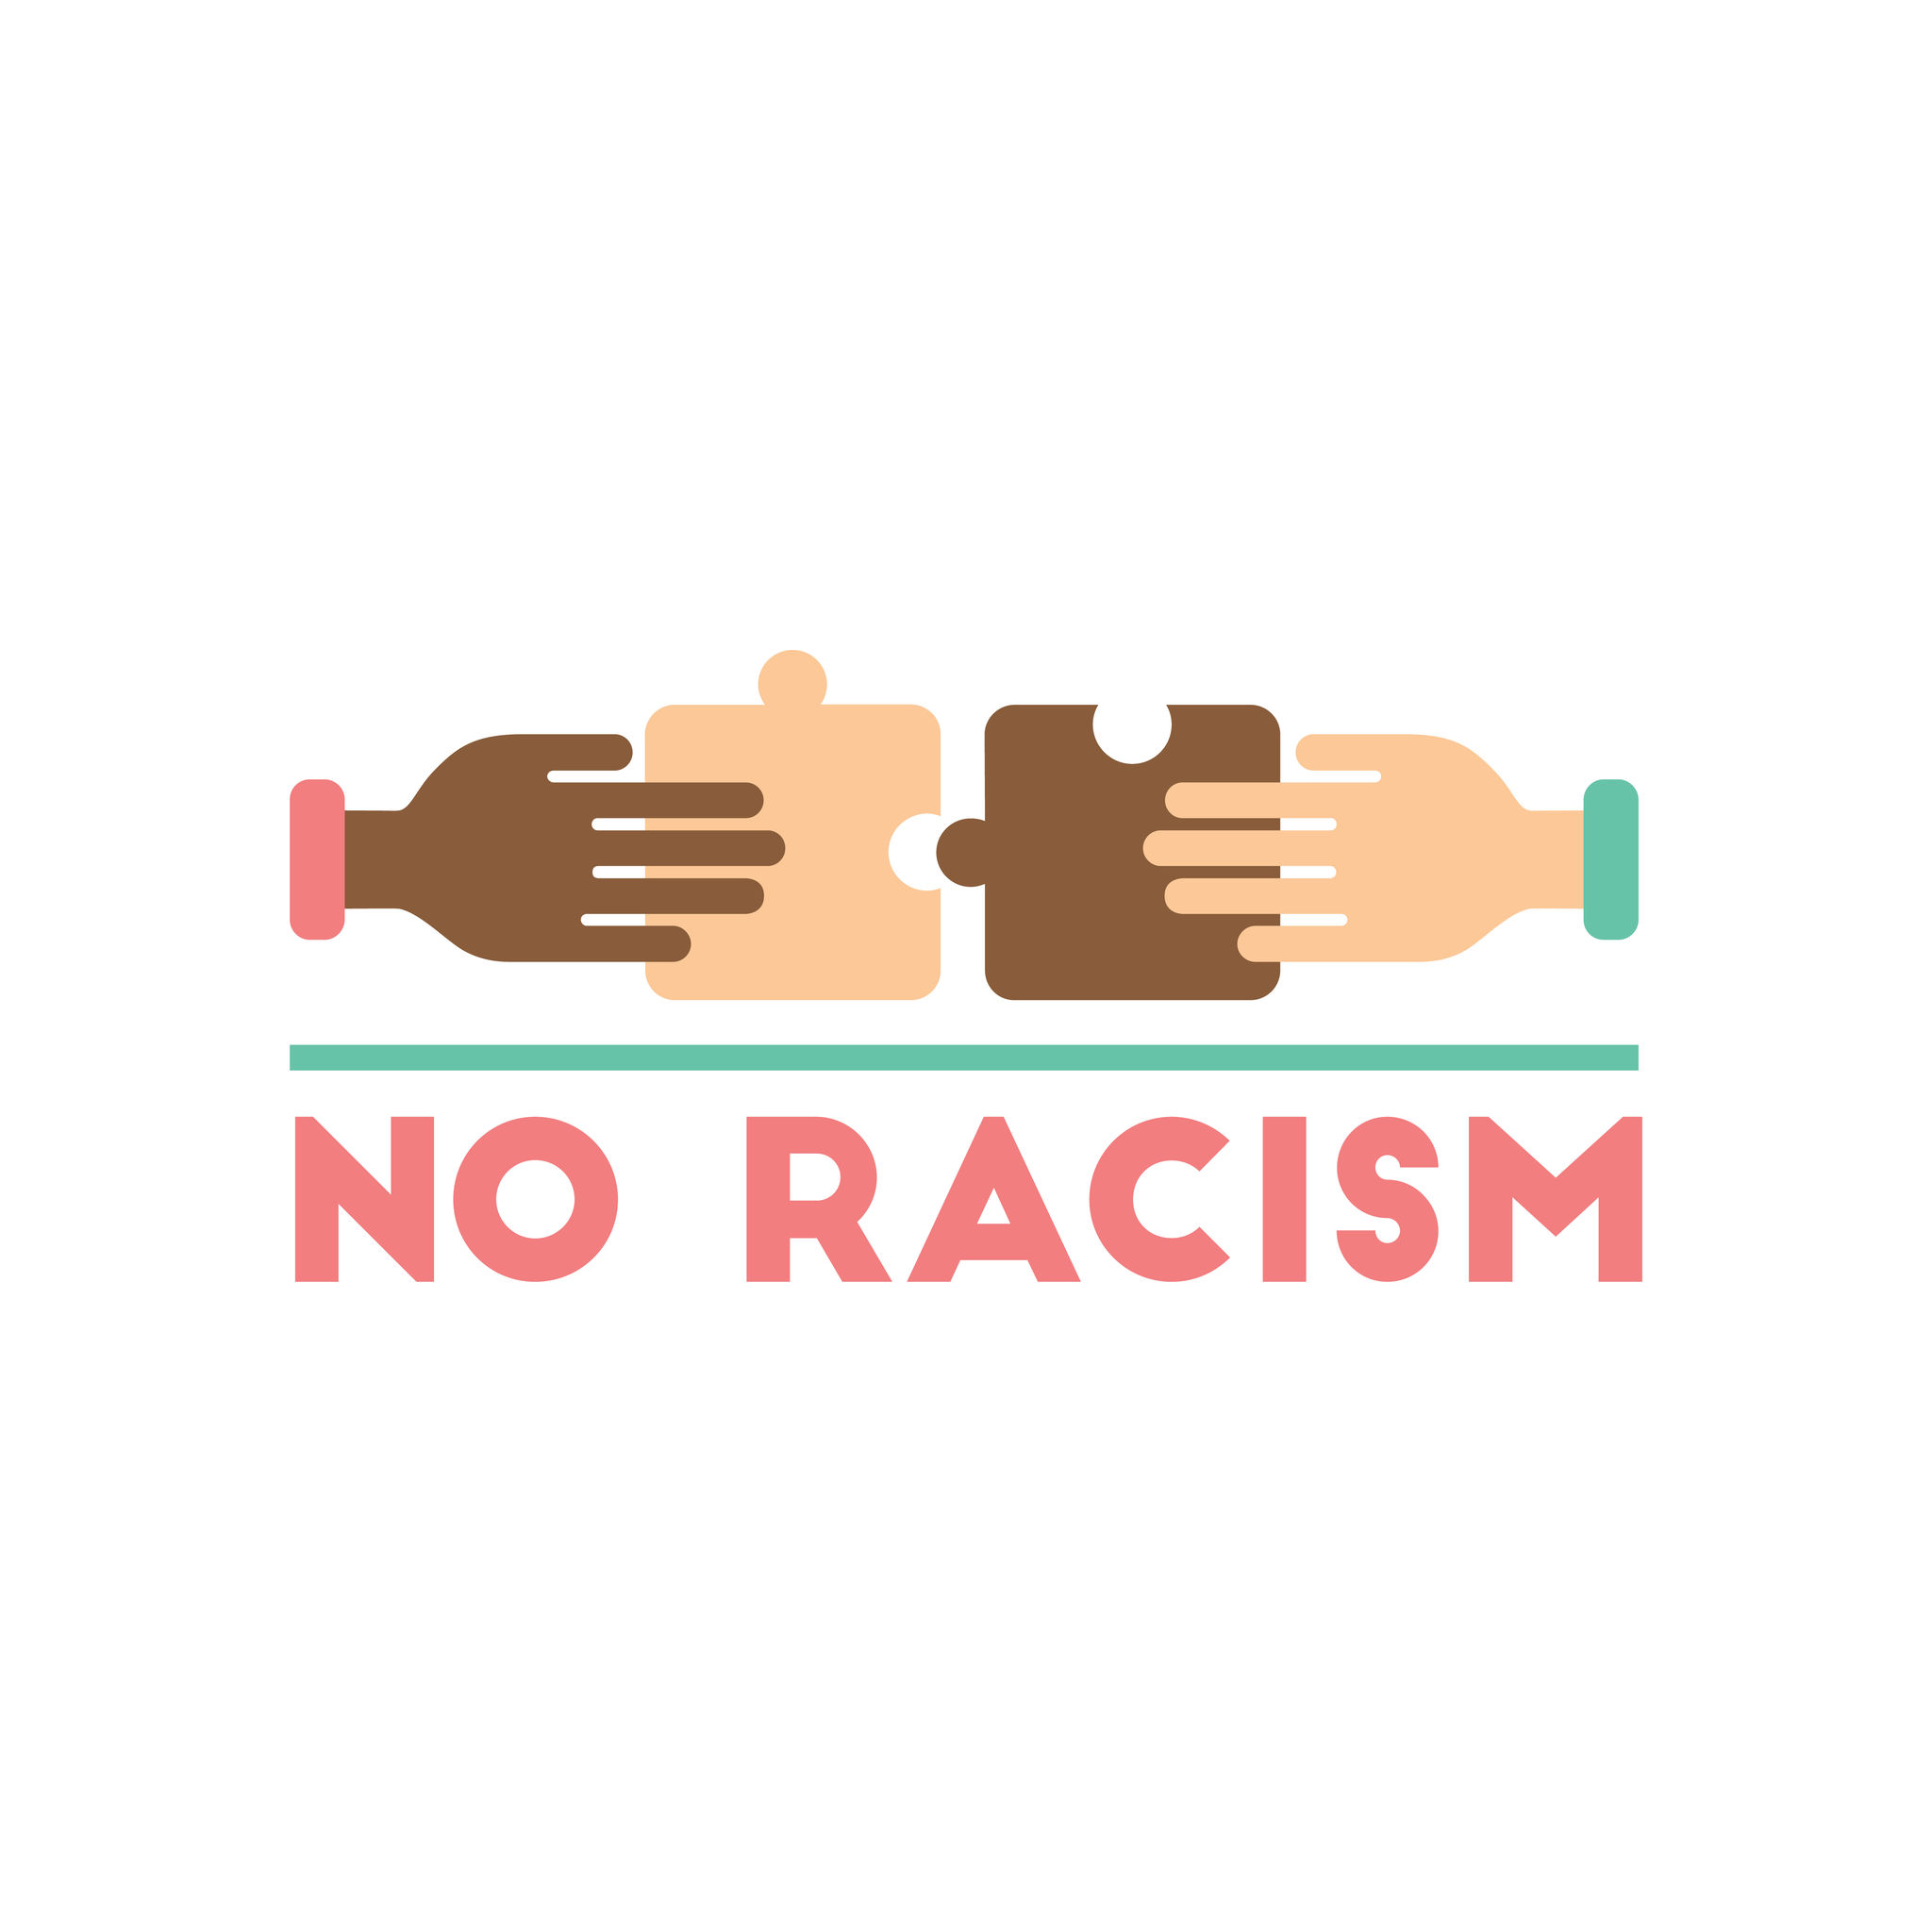 Cartoon graphics showing two hands of different skin tones putting two pieces of puzzle together, with the phrase "No Racism" underneath